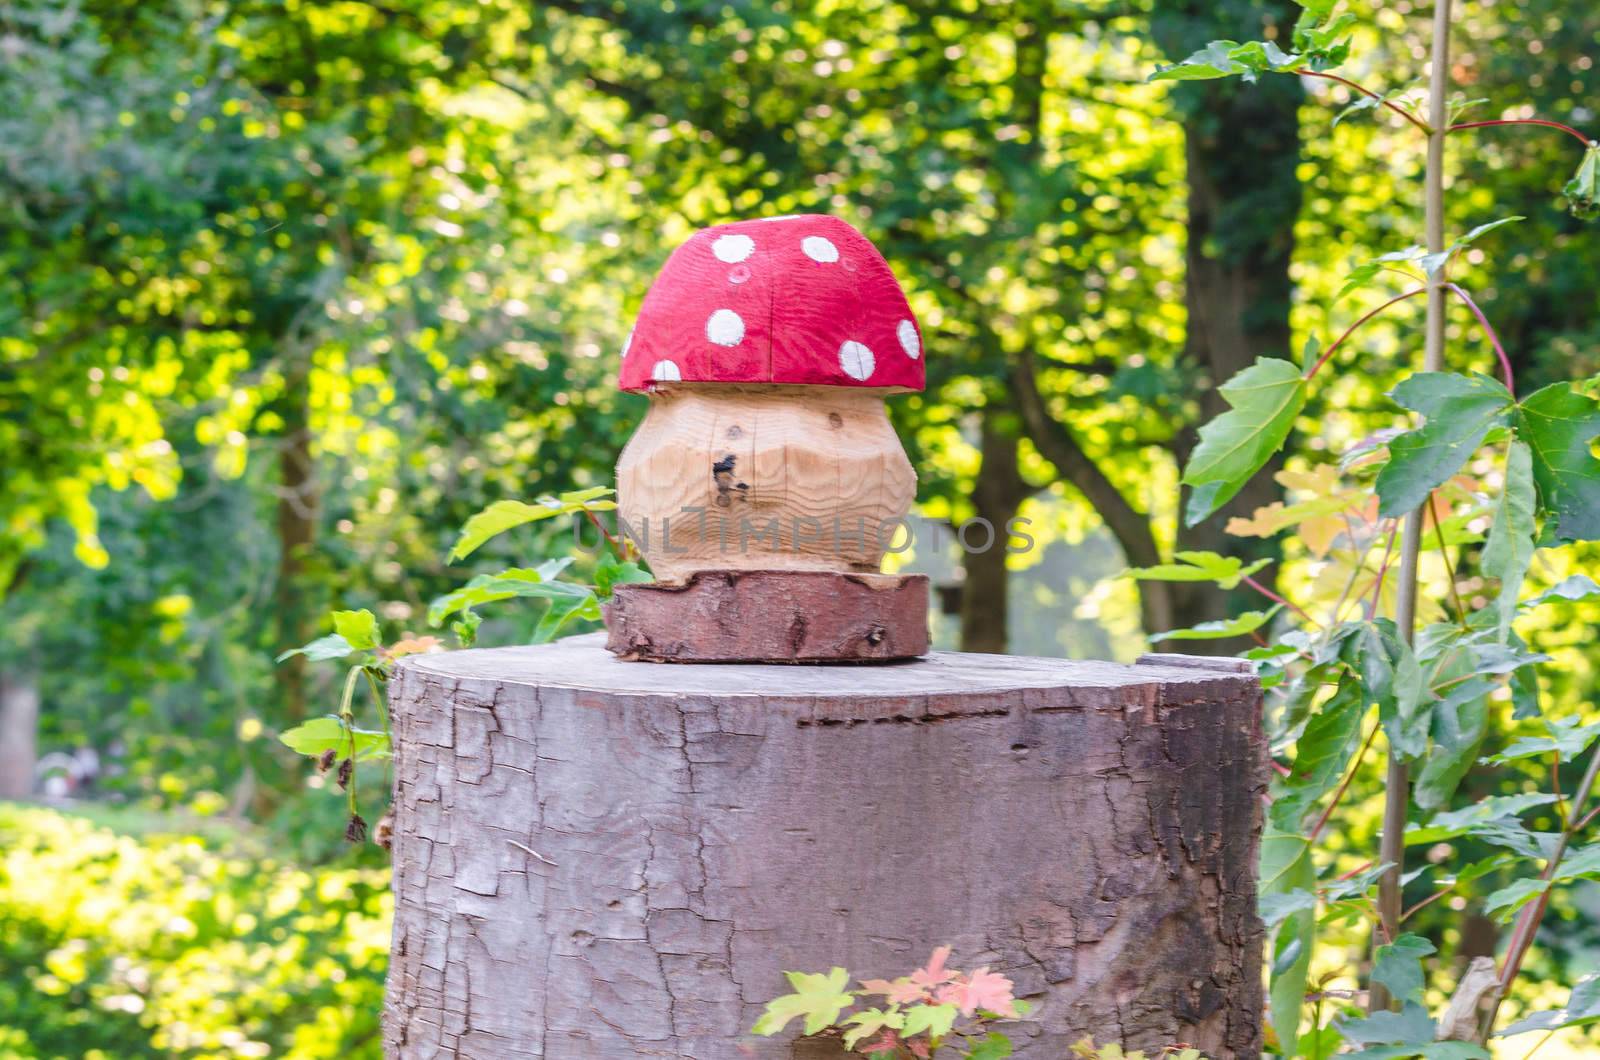 Fly agaric manufactured from wood on a tree trunk.